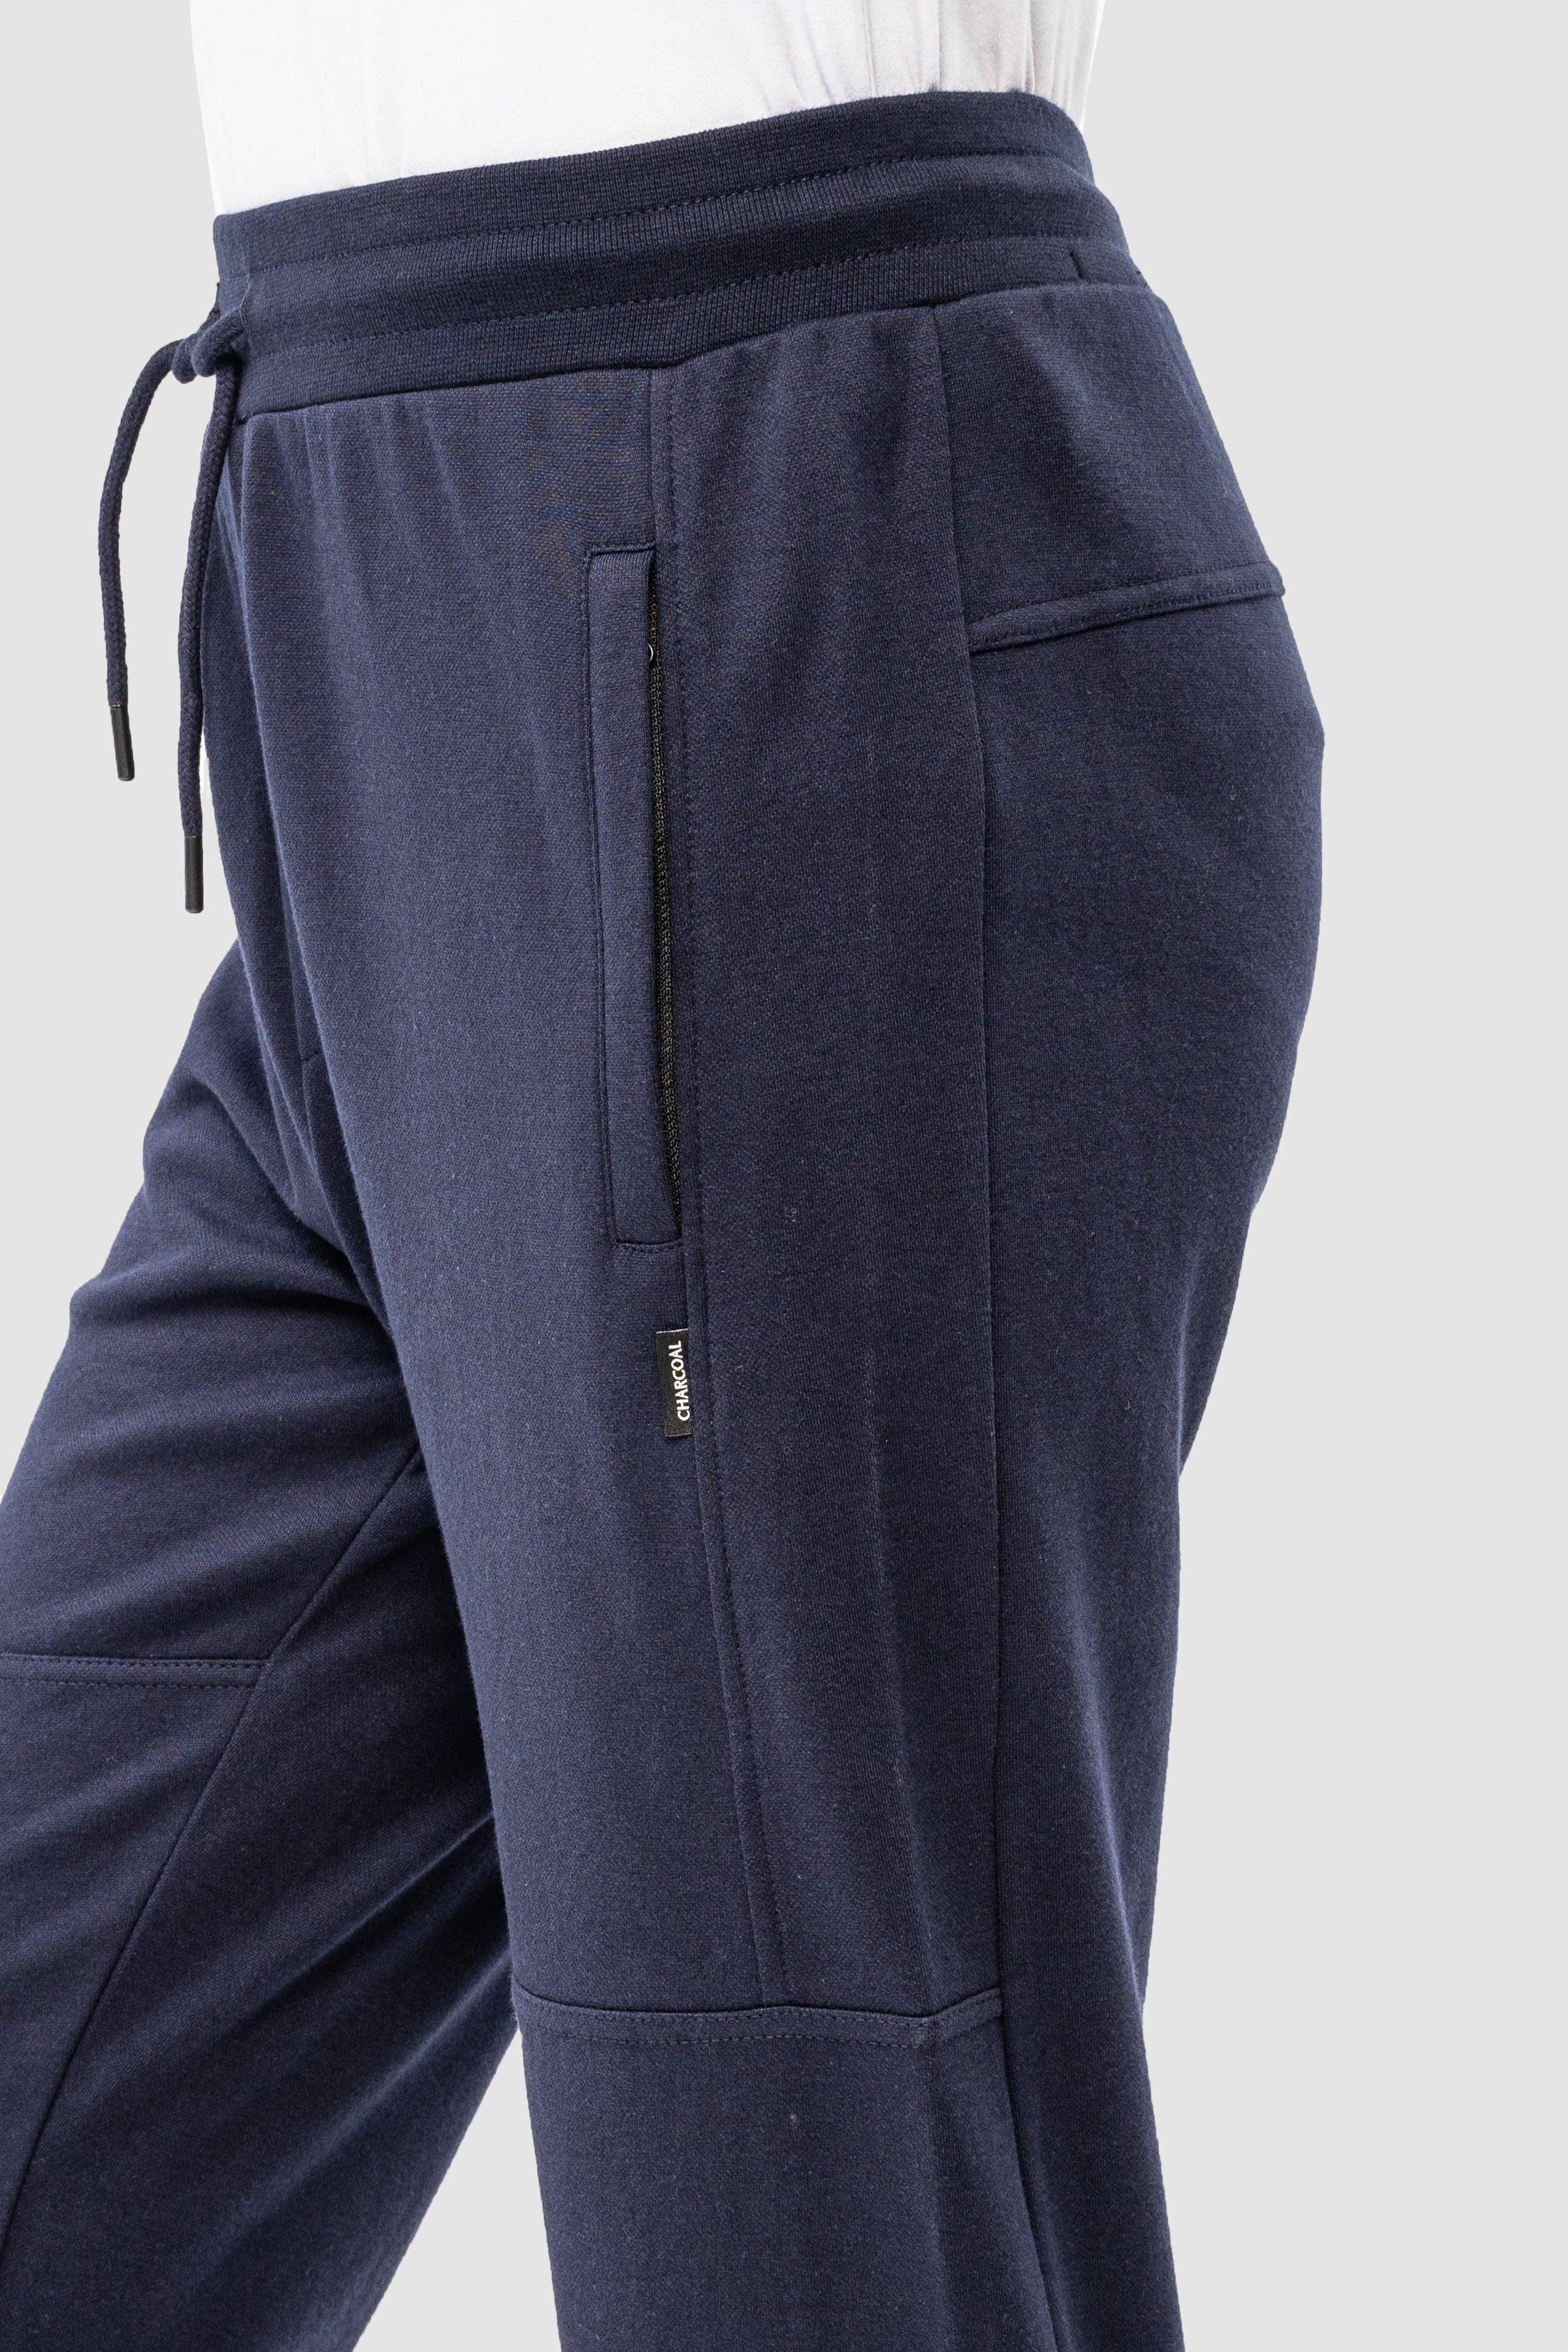 PIQUE INTERLOCK SLIMFIT TROUSER NAVY at Charcoal Clothing